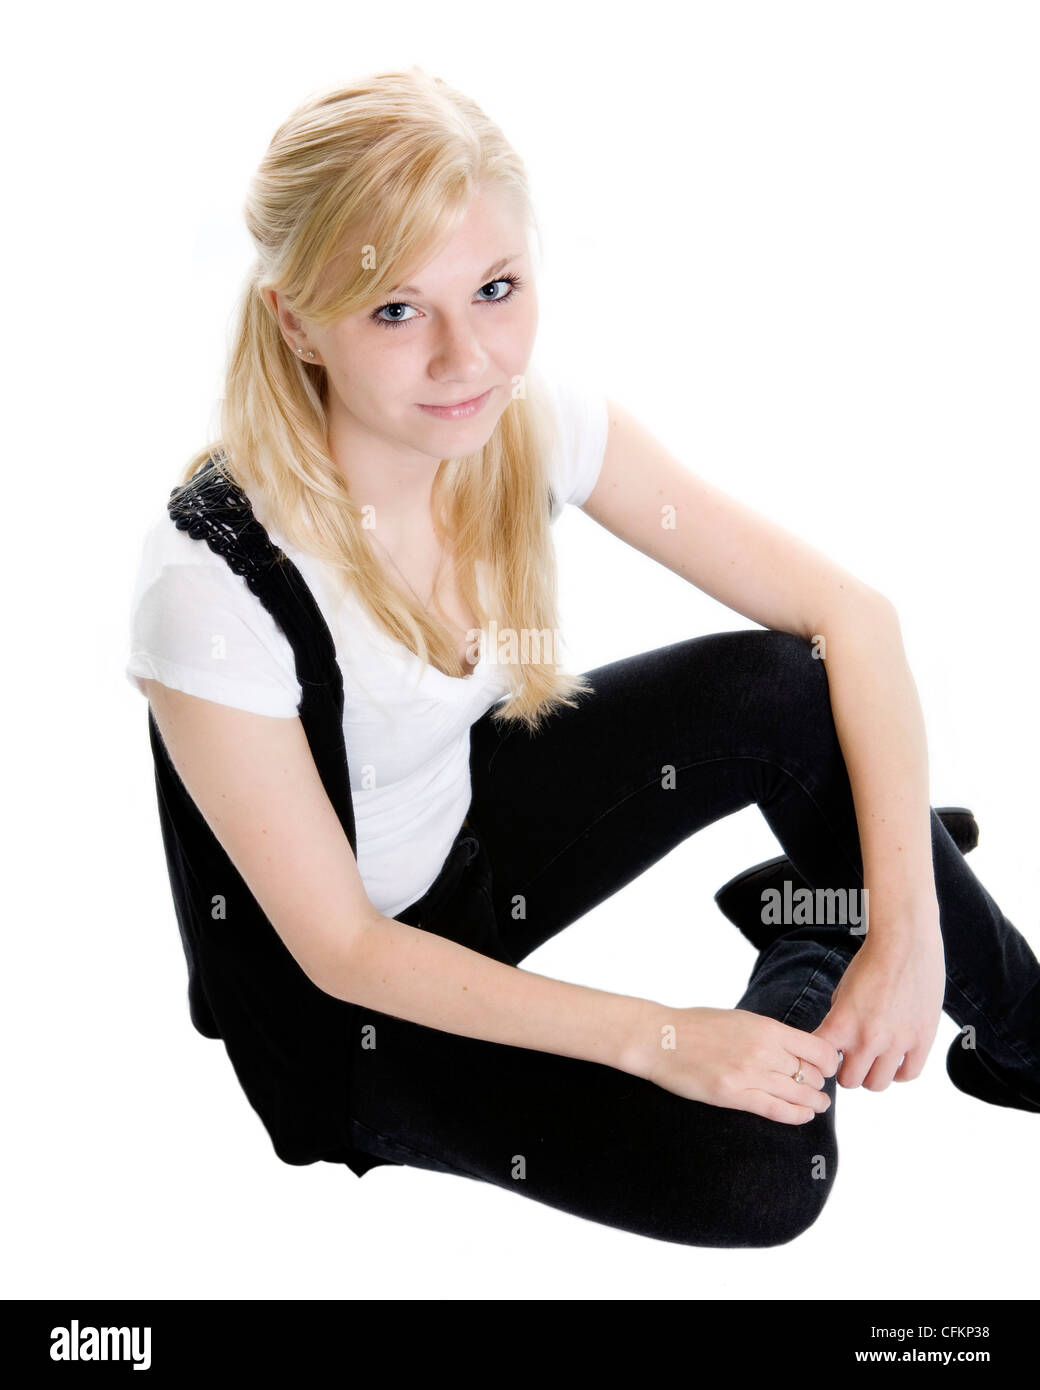 A teen girl sits in a casual manner. Stock Photo